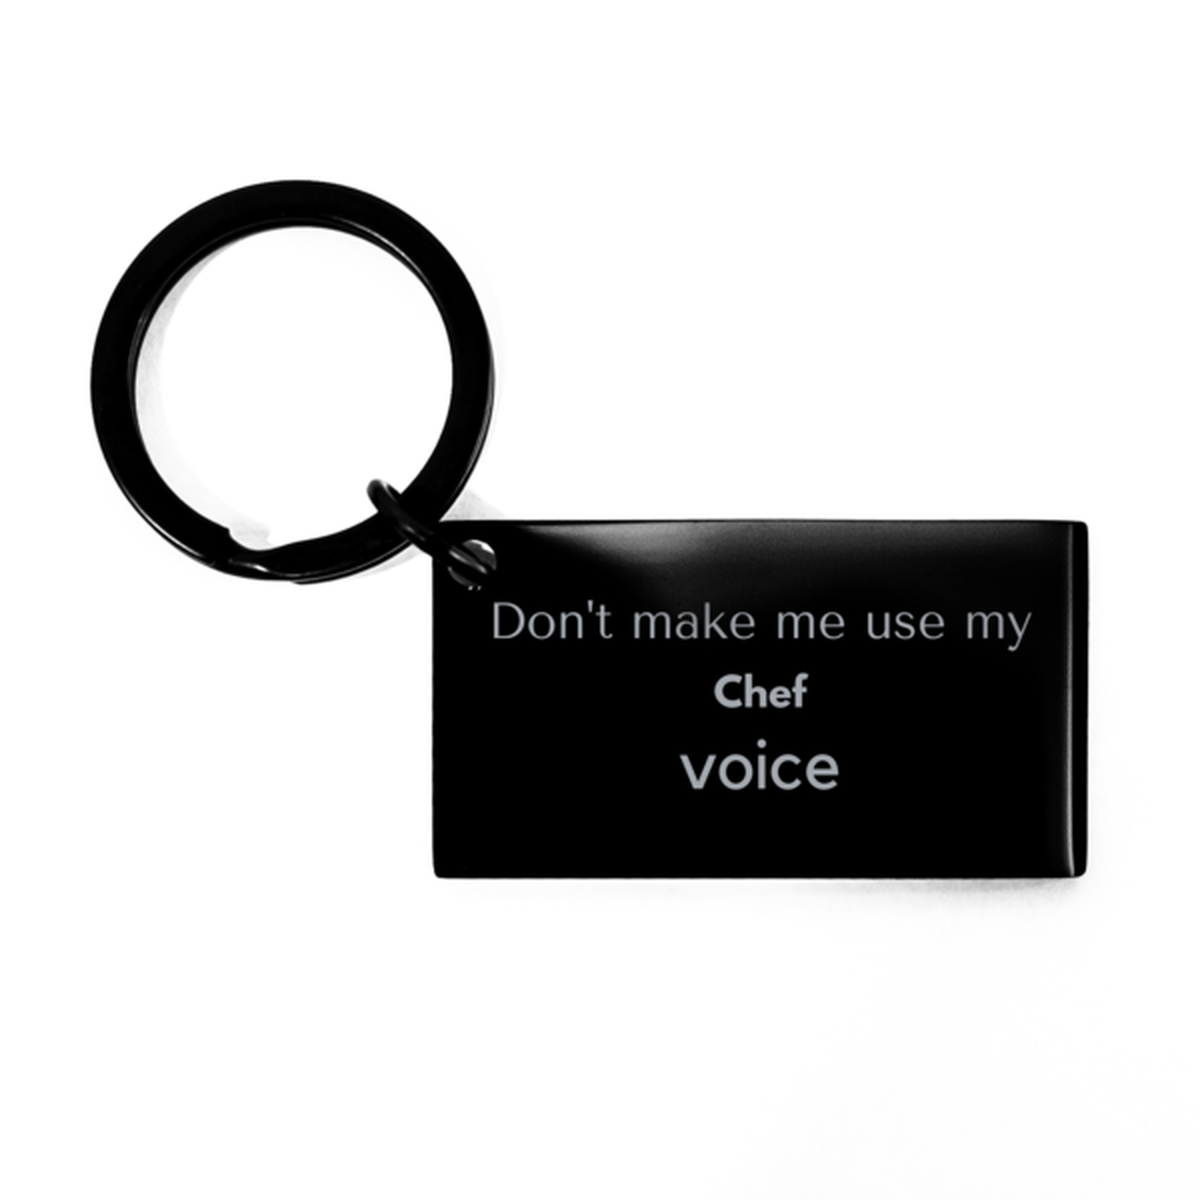 Don't make me use my Chef voice, Sarcasm Chef Gifts, Christmas Chef Keychain Birthday Unique Gifts For Chef Coworkers, Men, Women, Colleague, Friends